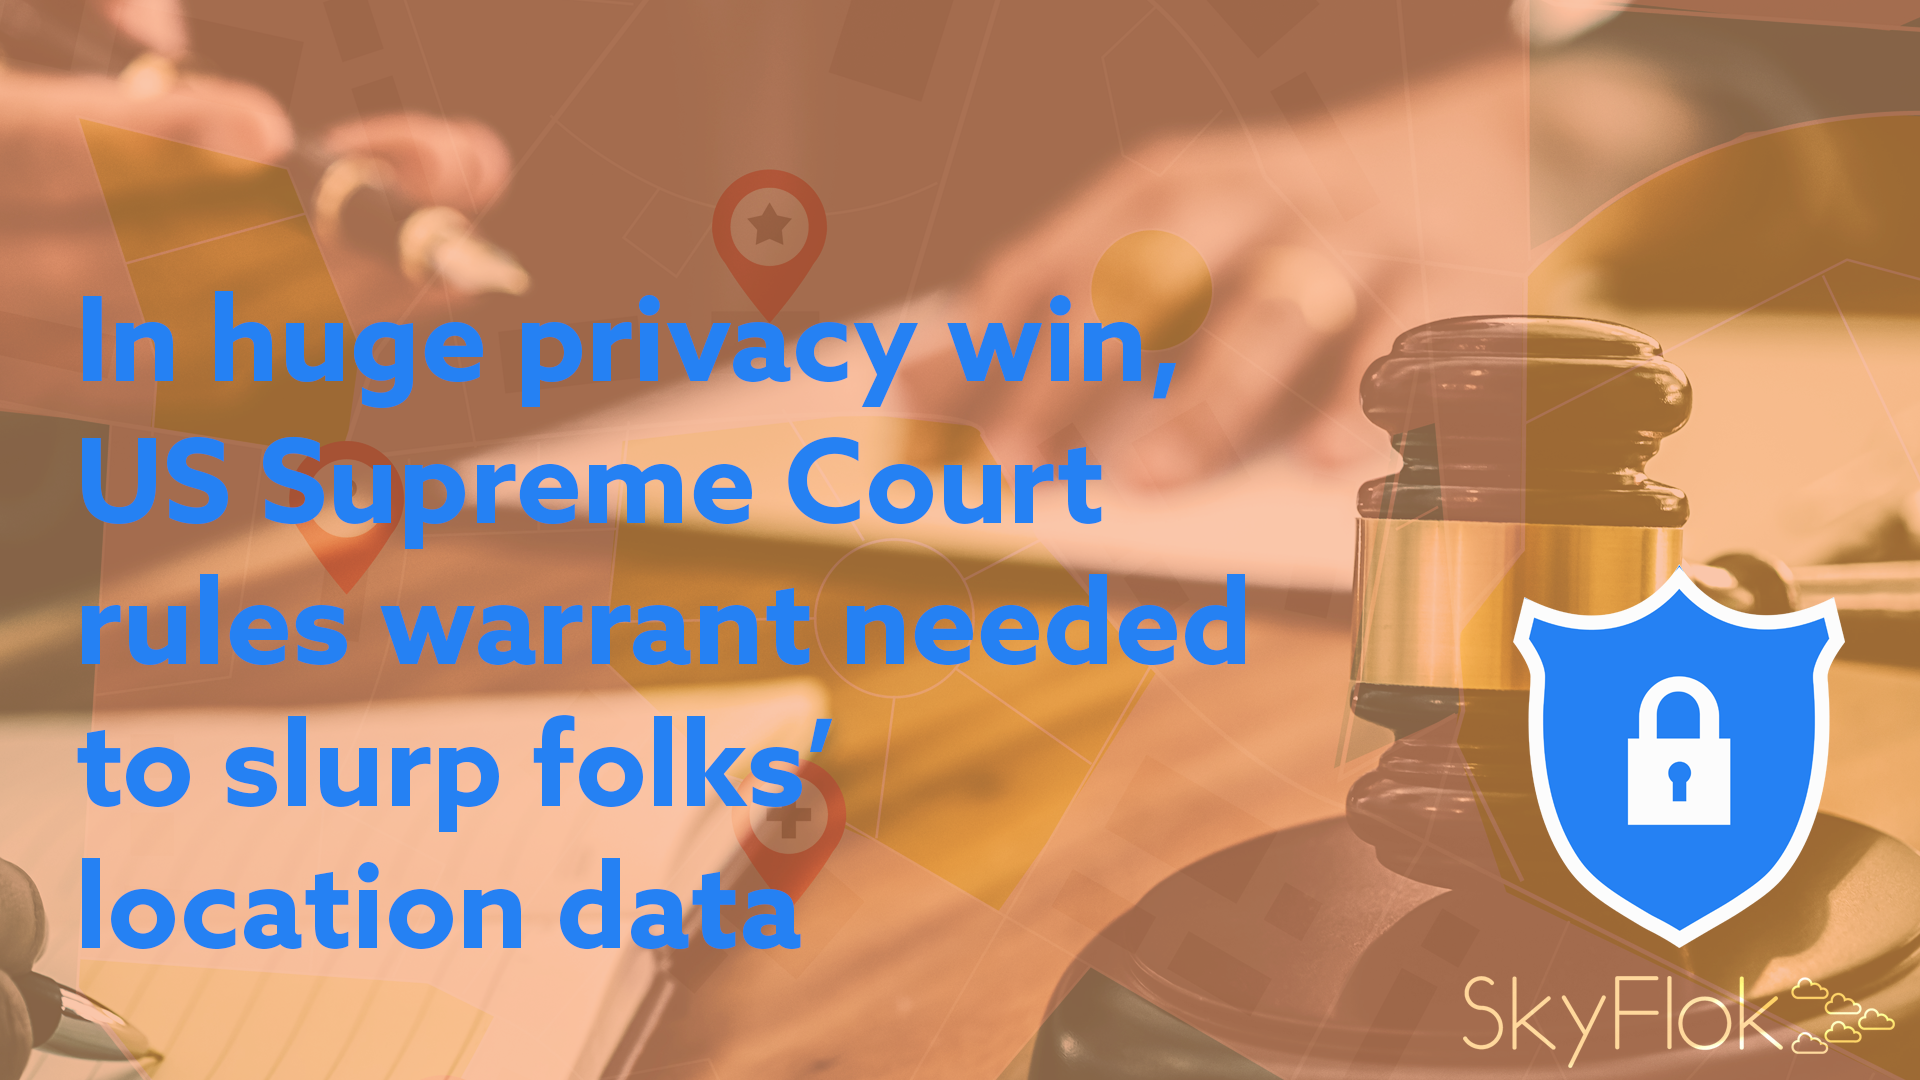 You are currently viewing In huge privacy win, US Supreme Court rules warrant needed to slurp folks’ location data